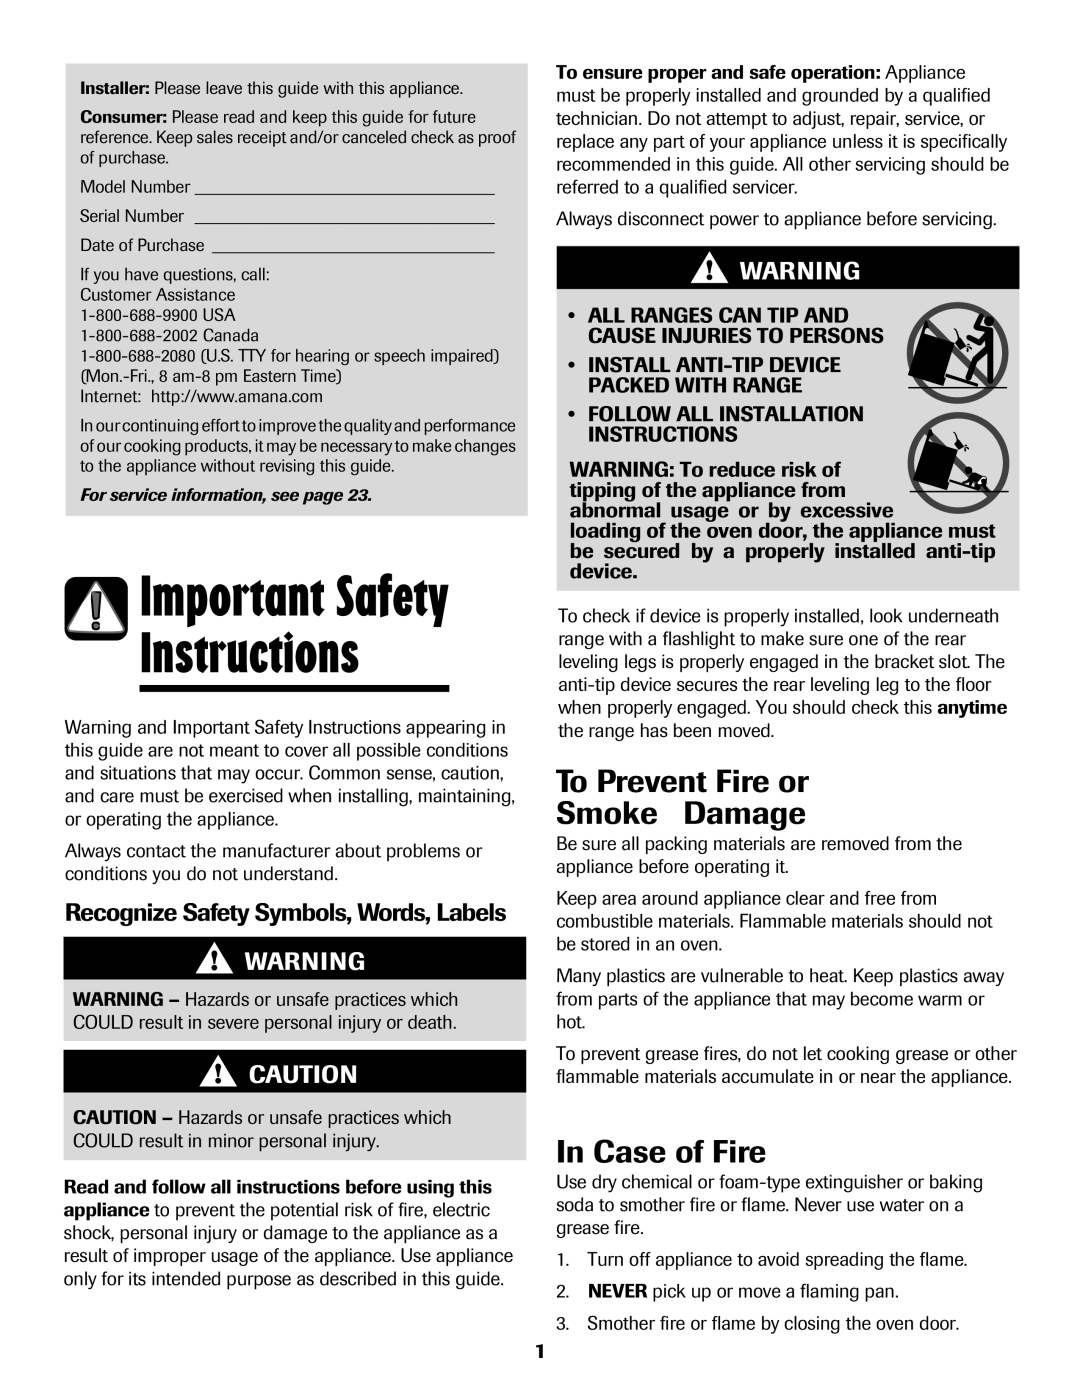 Amana 8113P598-60 manual Instructions, Important Safety, To Prevent Fire or Smoke Damage, In Case of Fire 